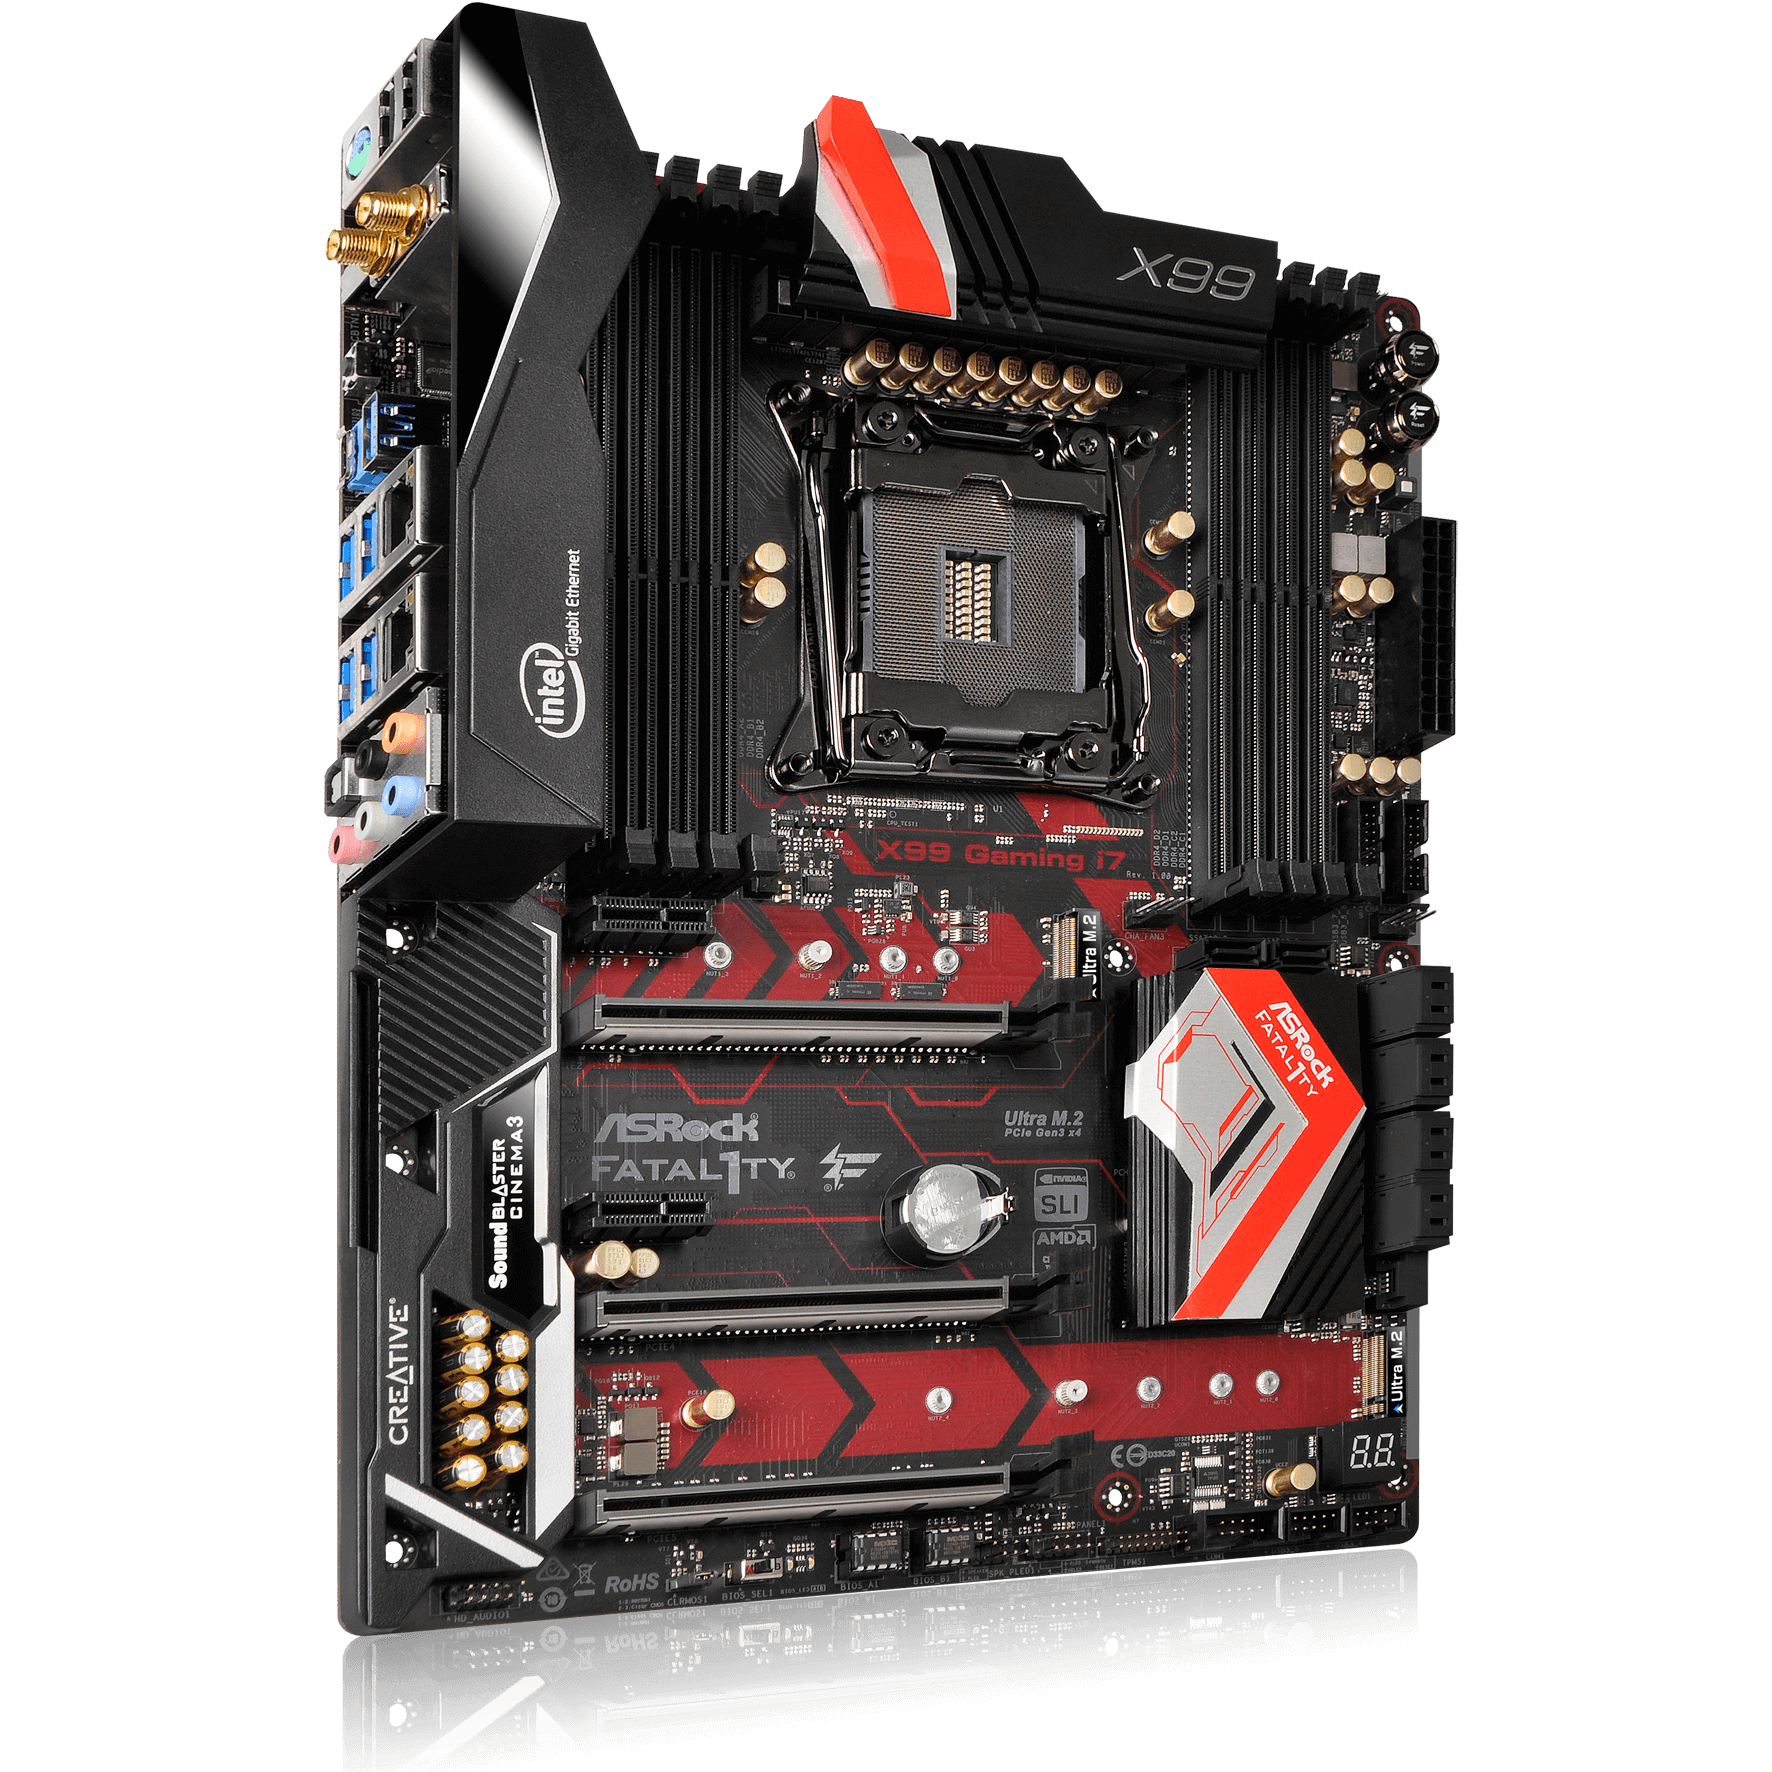 Gaming pro 1. ASROCK fatal1ty x99 professional Gaming. ASROCK x99 Taichi. ASROCK fatal1ty x99 professional Gaming i7. ASROCK professional fatal1ty.